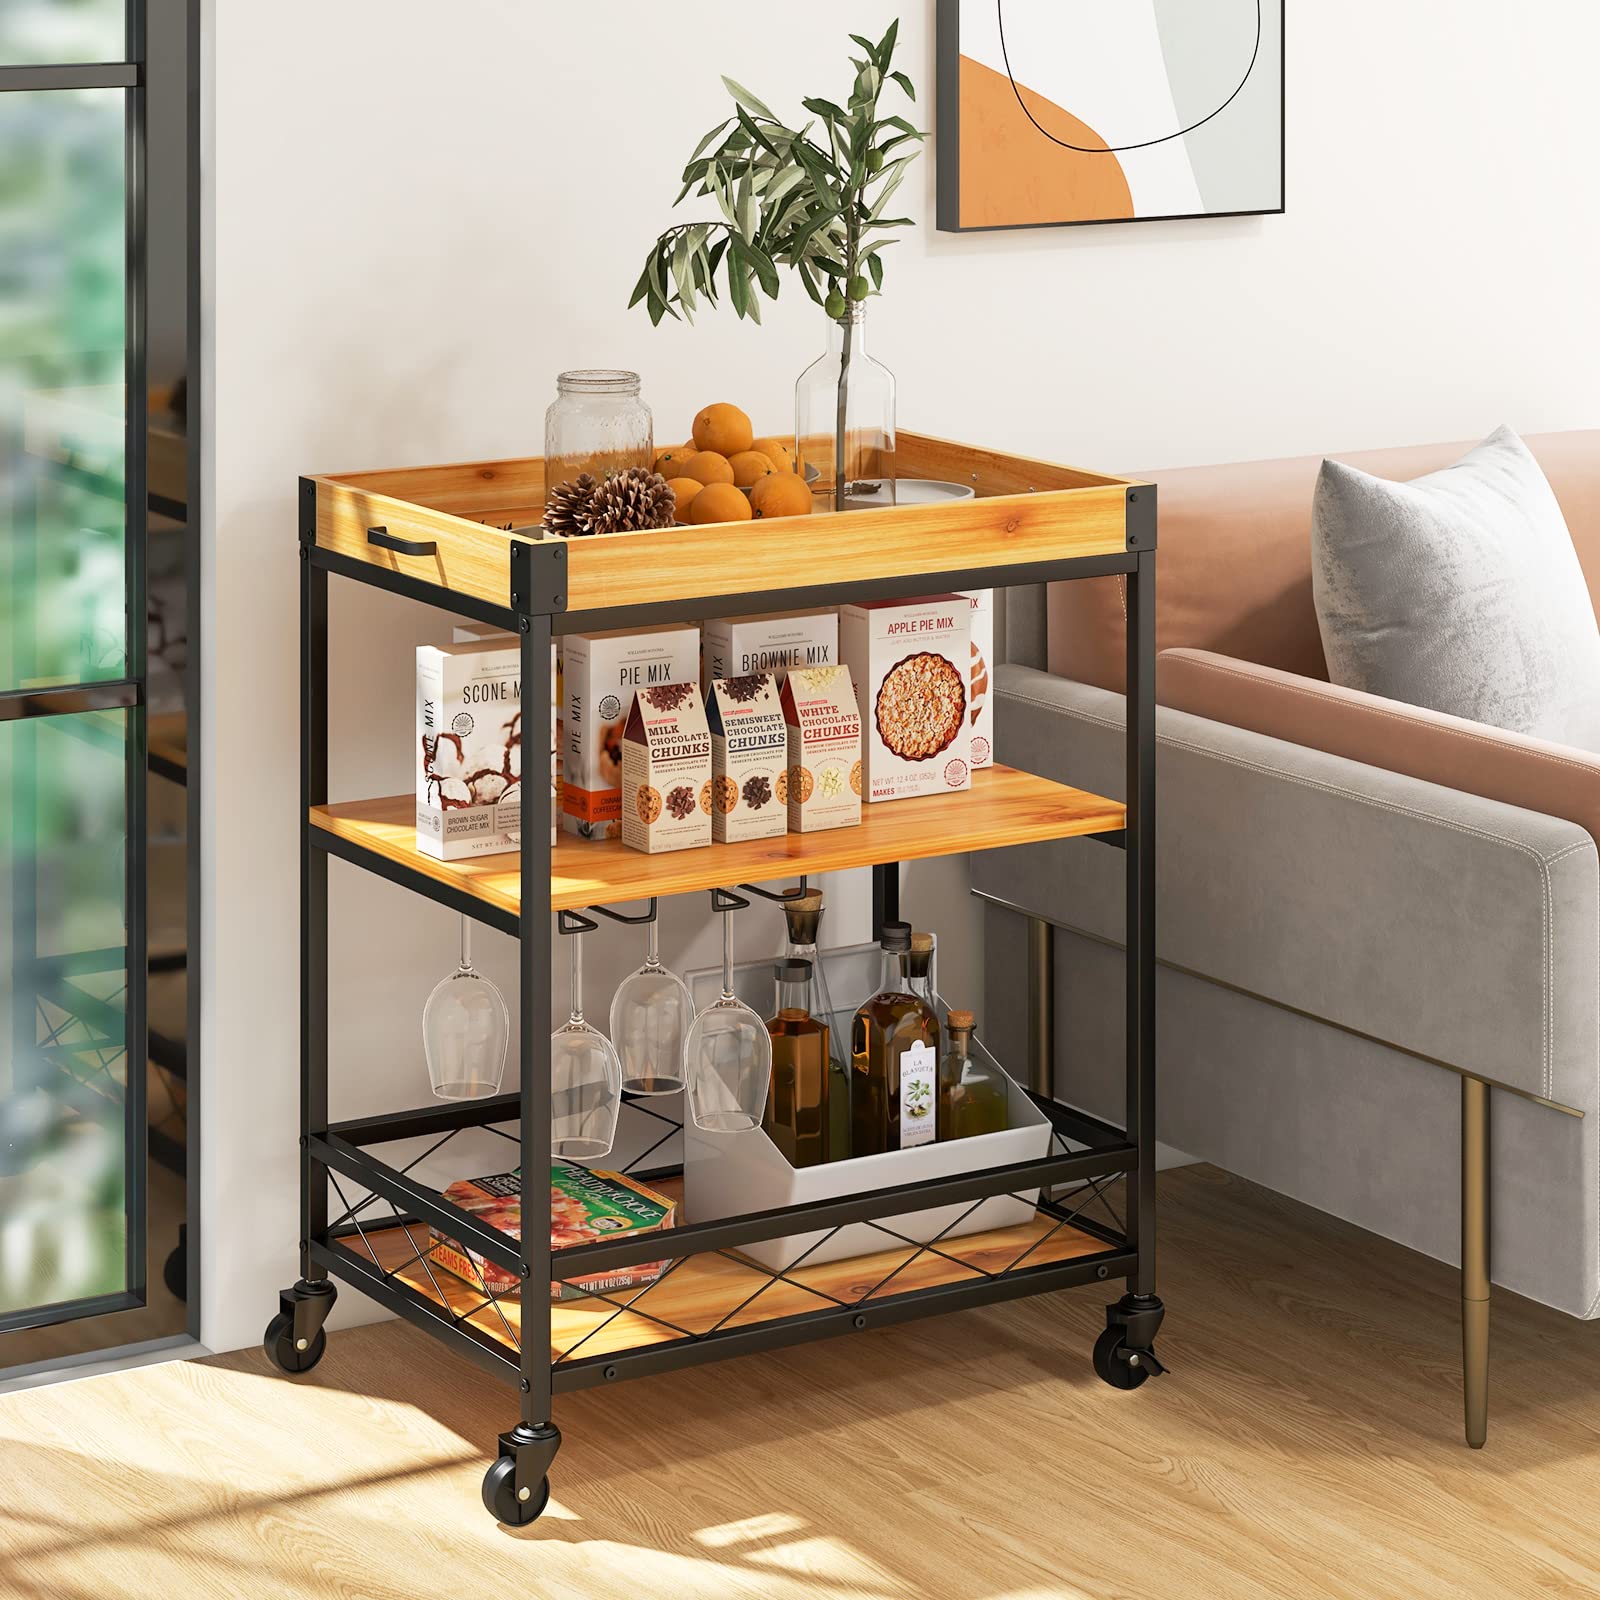 Giantex Bar Cart on Wheels, Mobile Serving Cart Cart 3-Tier w/Removable Tray, Glass Holder